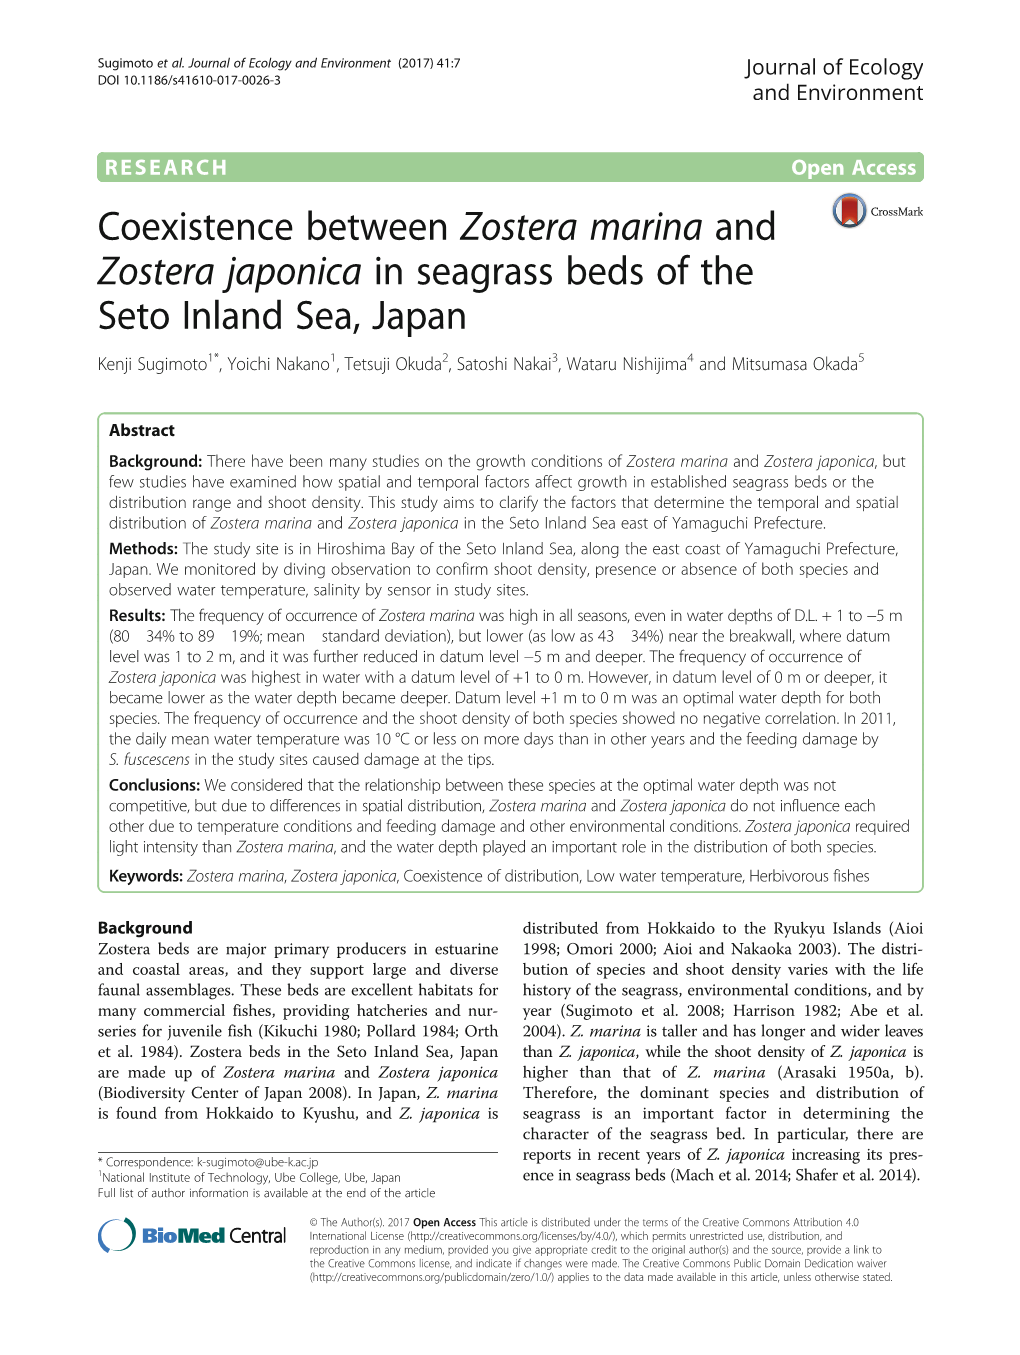 Coexistence Between Zostera Marina and Zostera Japonica in Seagrass